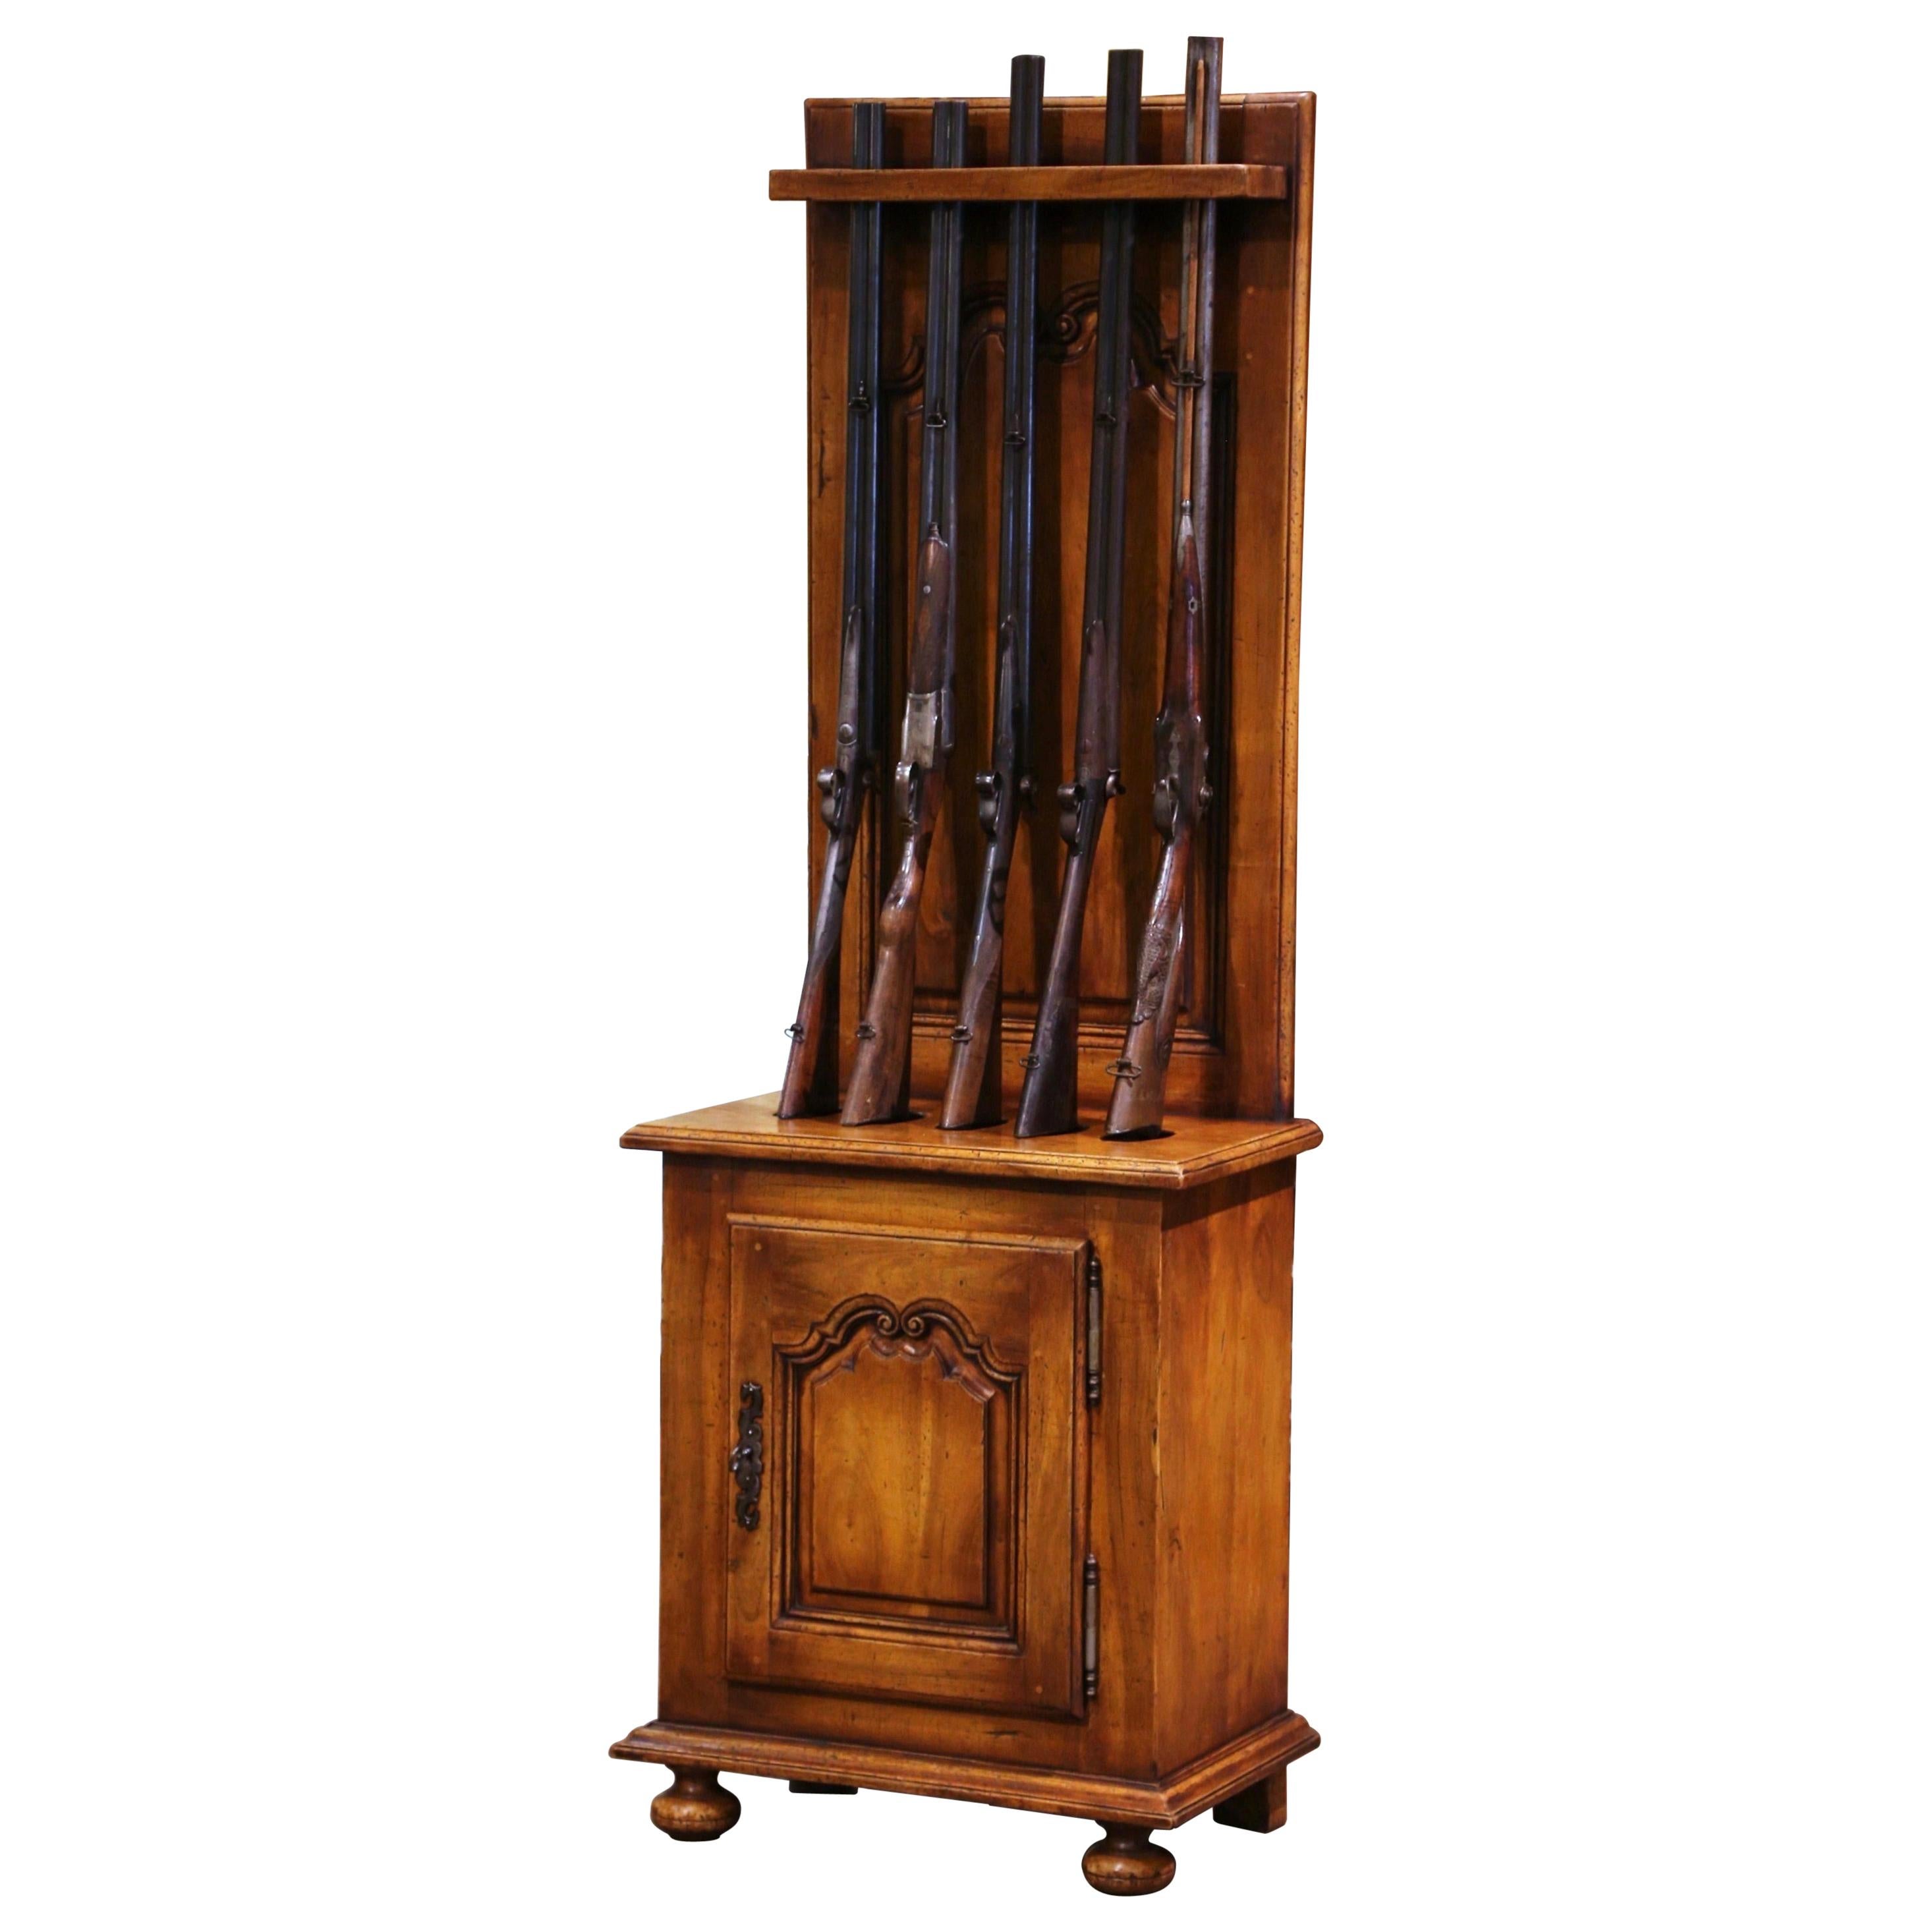 Early 20th Century French Louis XIV Carved Walnut Gun Display Cabinet